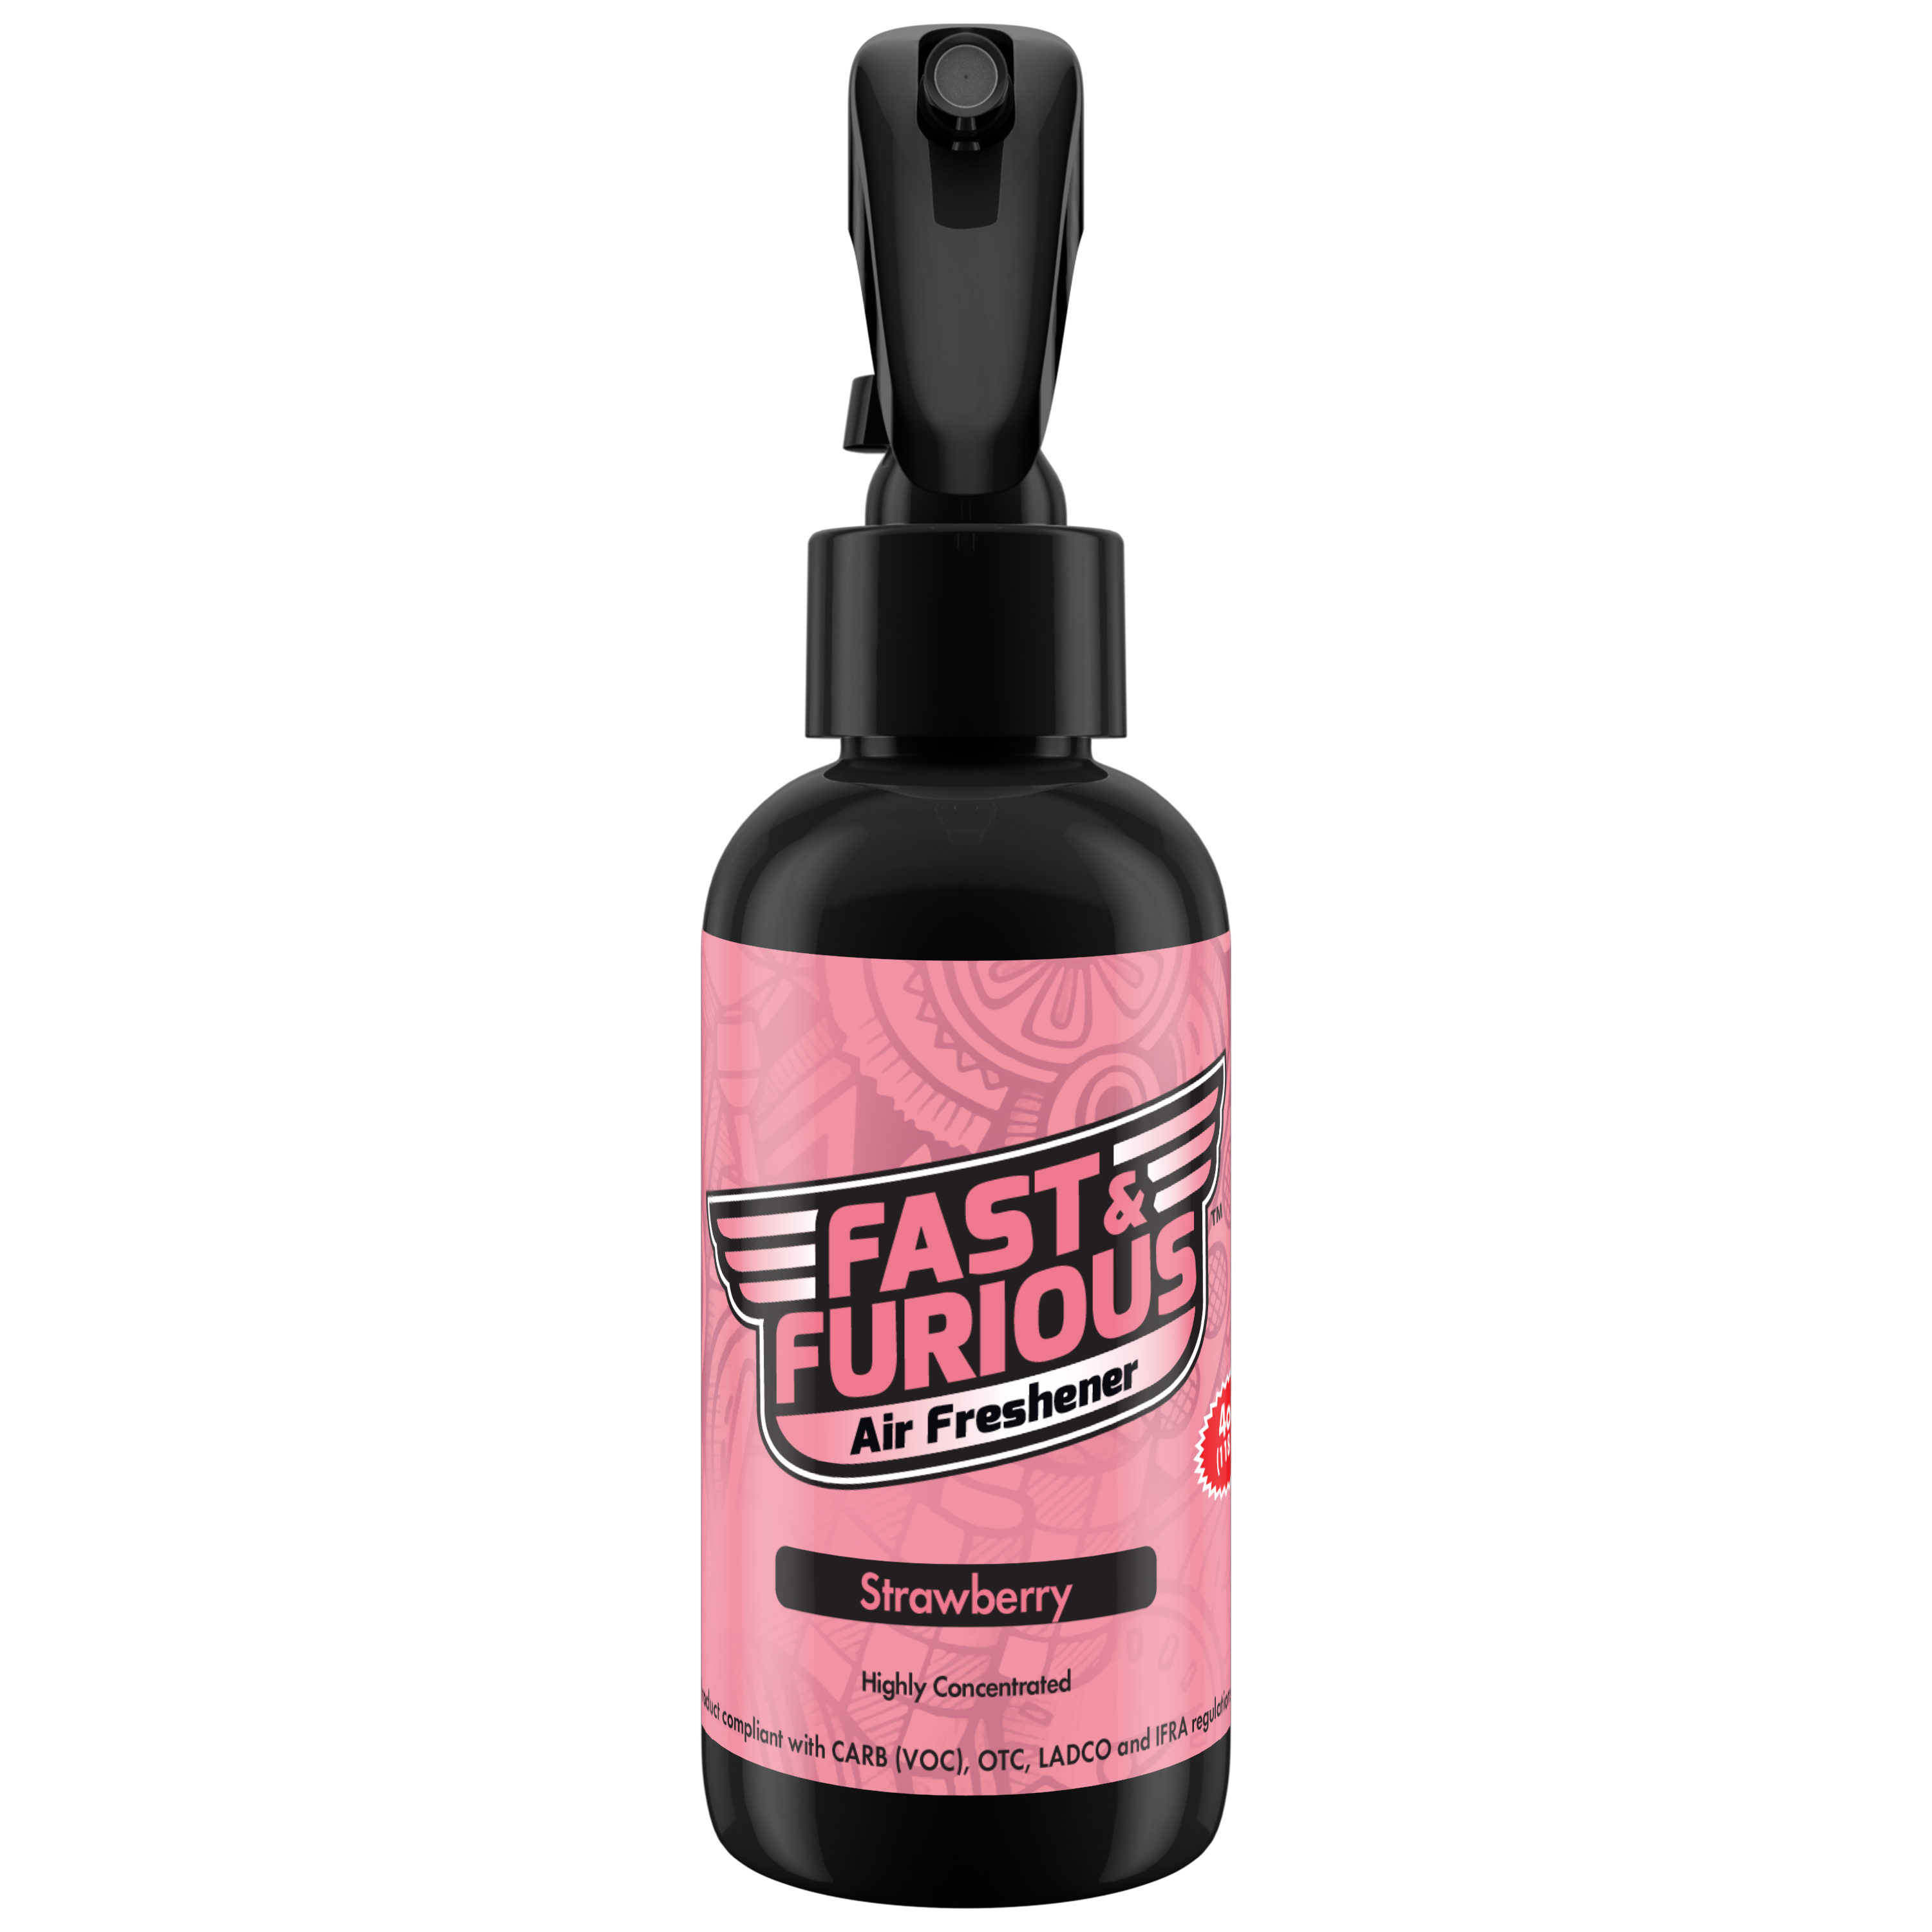 Fast and Furious Air Freshener - Strawberry Scent